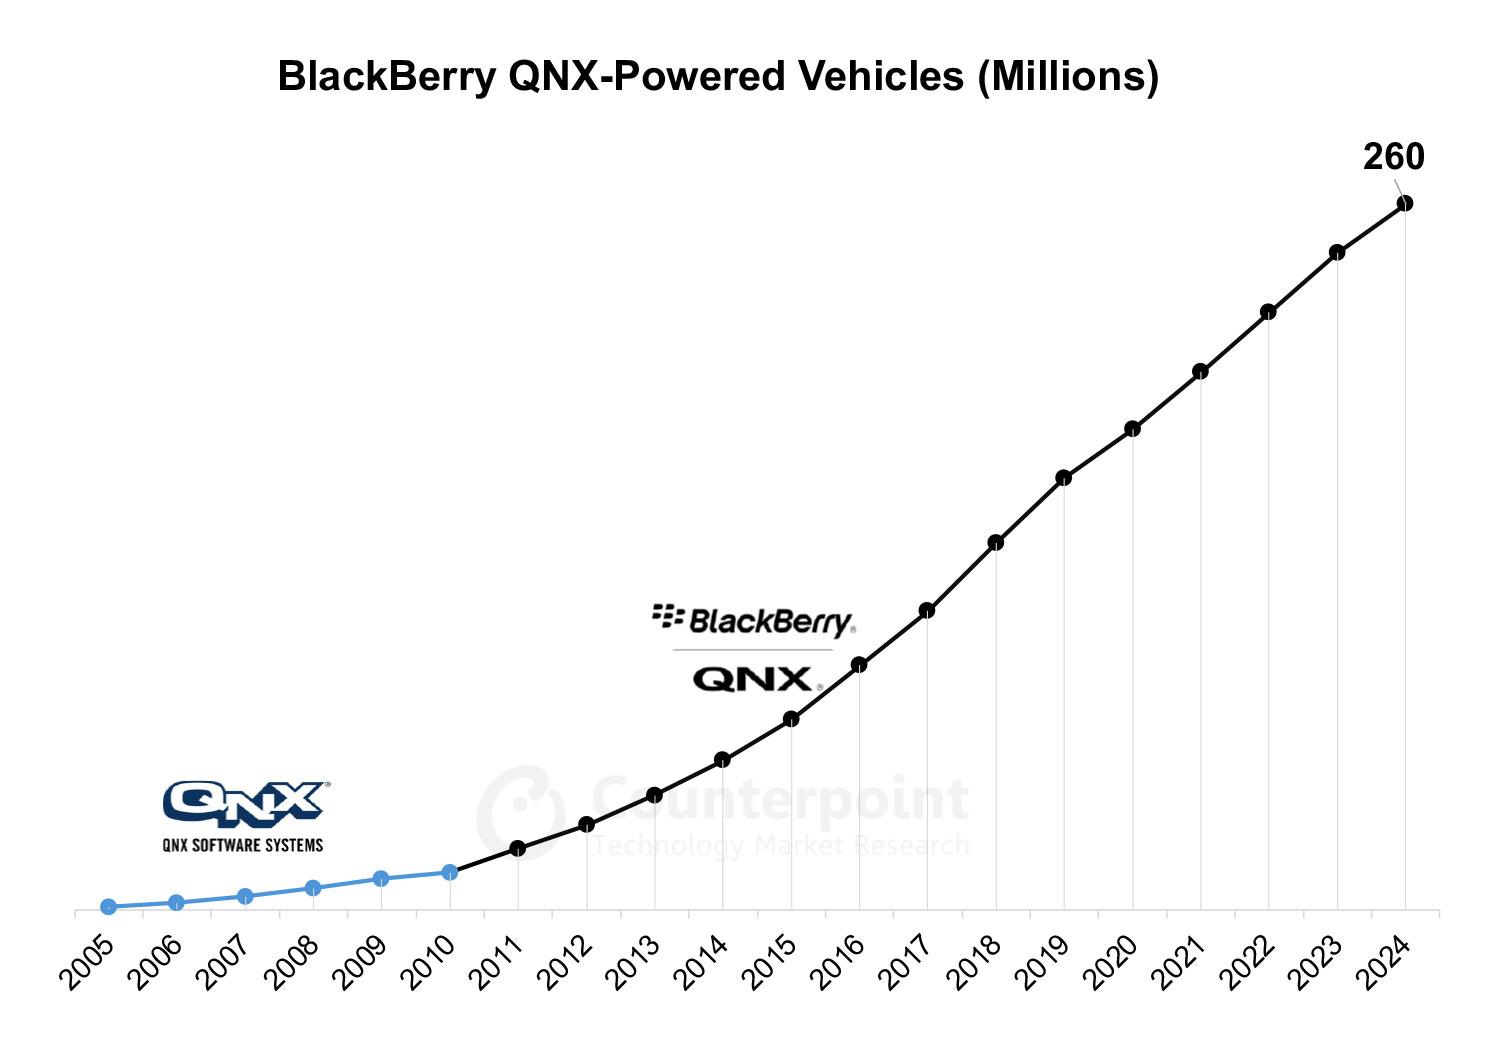 BlackBerry-QNX-Powered Vehicles (In millions)